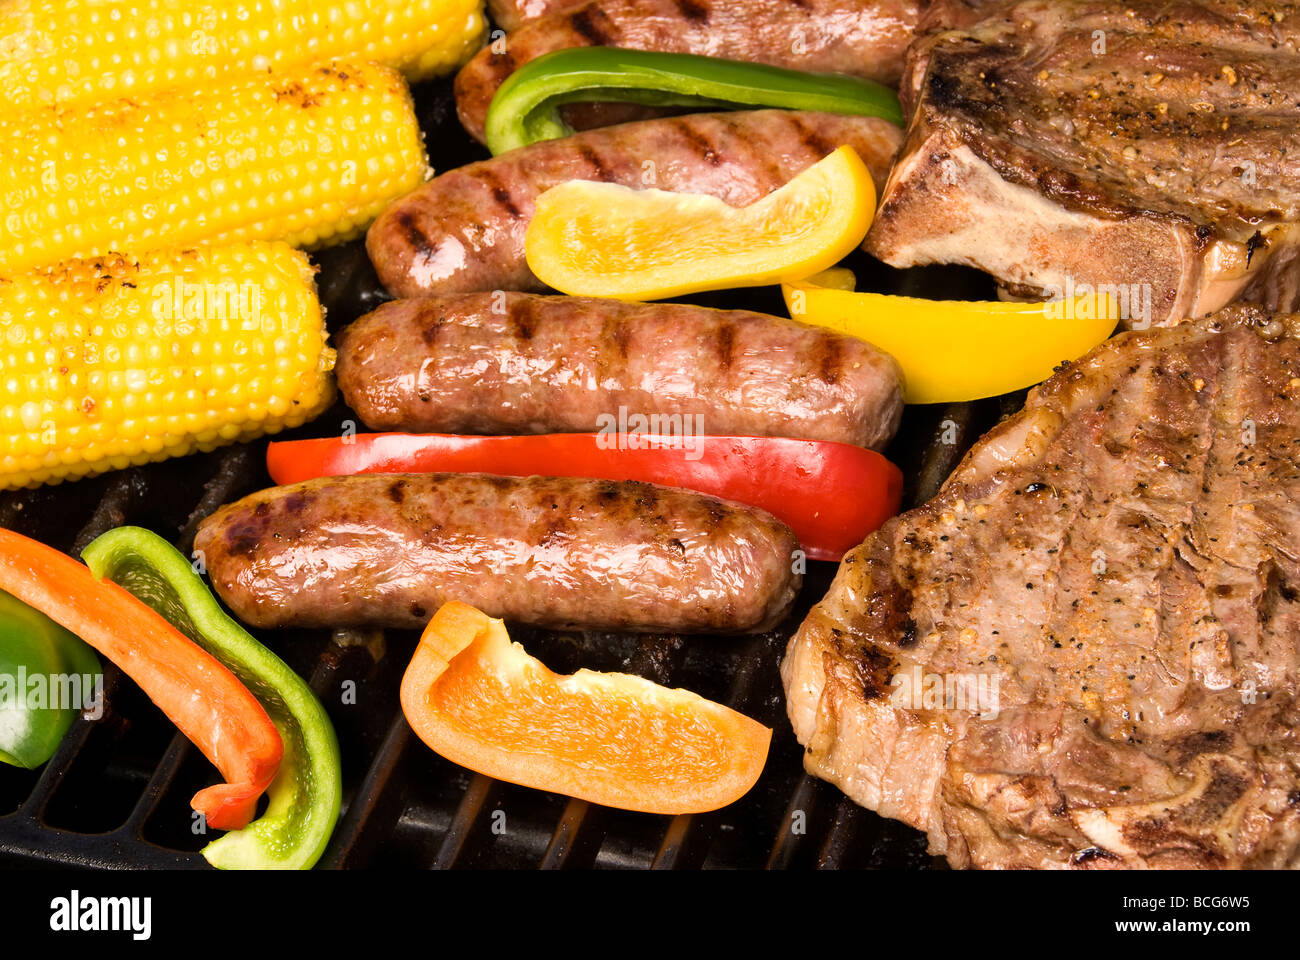 A barbecue spread of bratwurst corn on the cob and sirloin steak with bell pepper garnish for awesome flavor Stock Photo